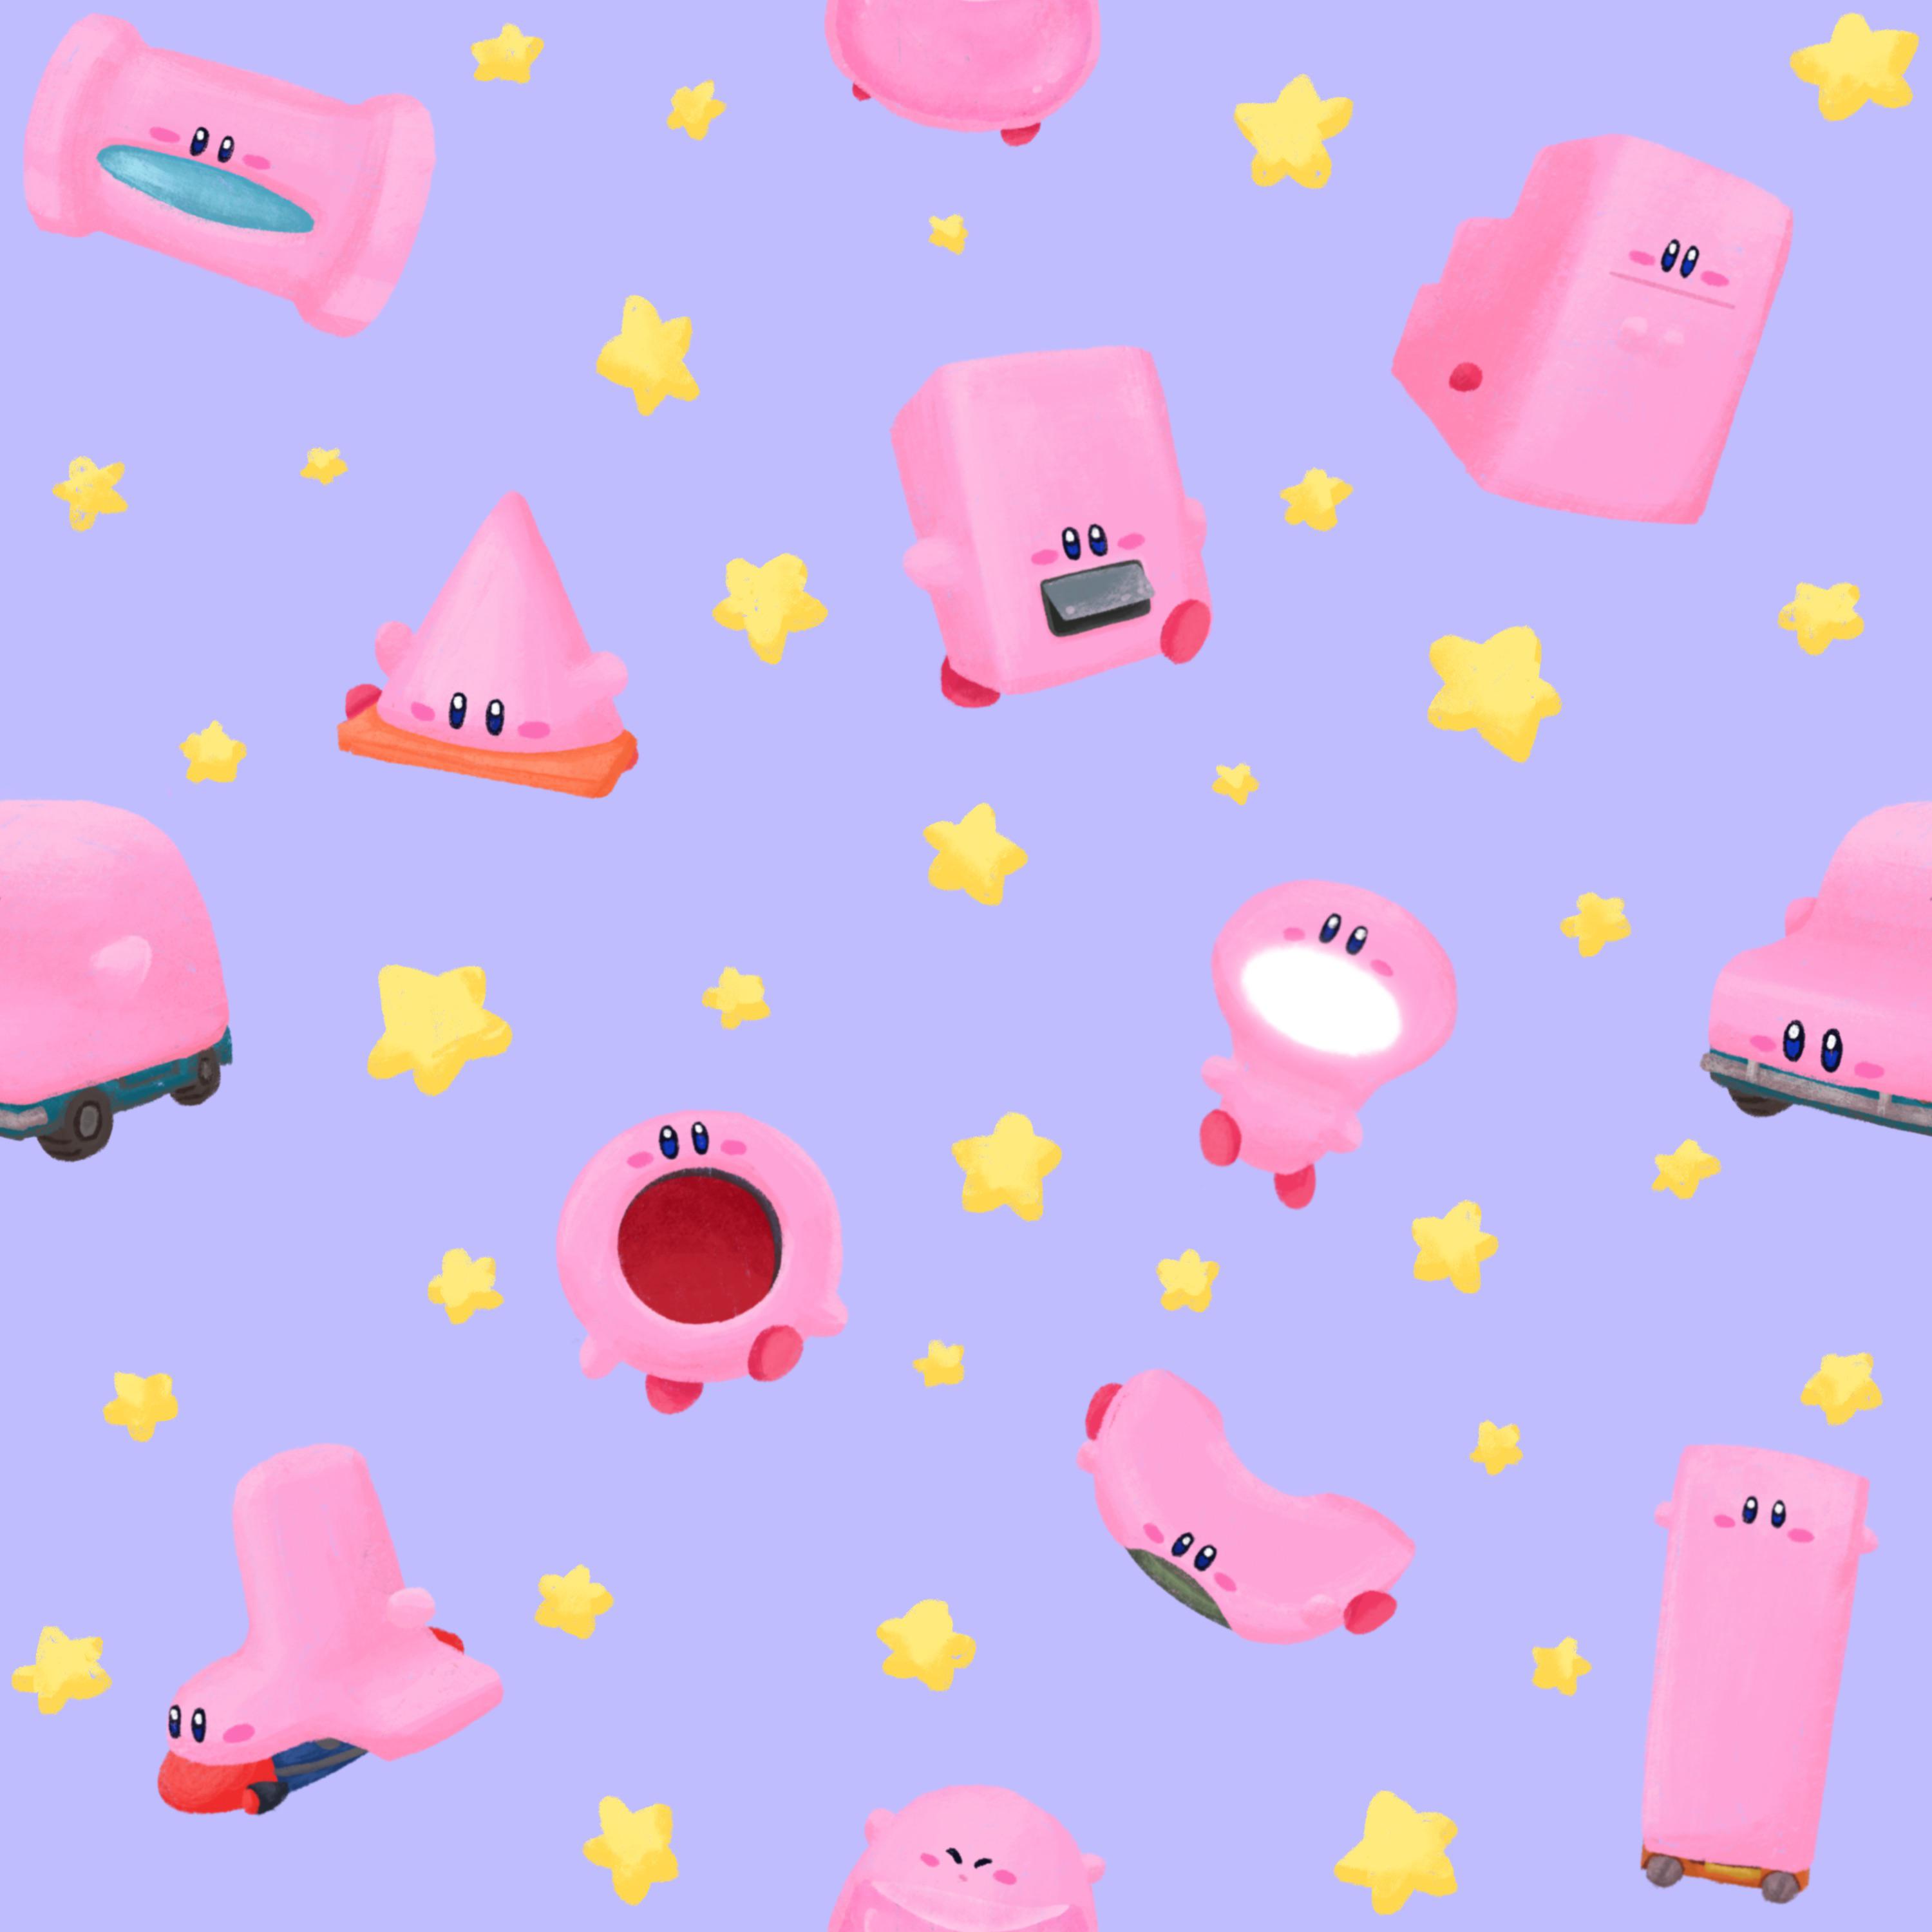 Made some Kirby mouthfull wallpaper :) feel free to use them!